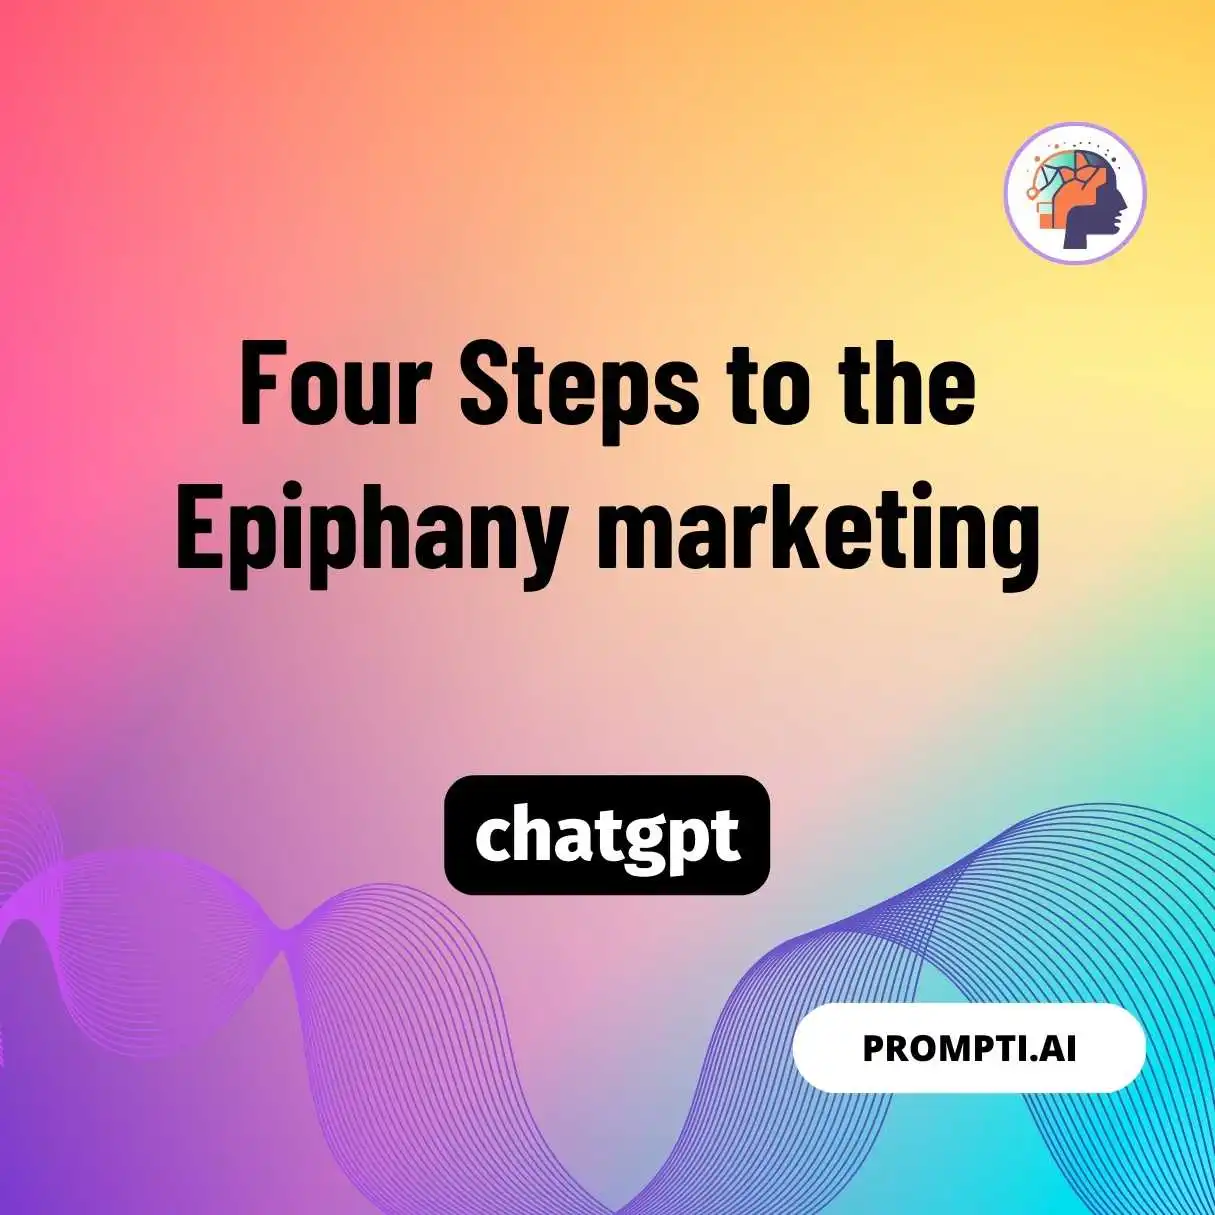 Four Steps to the Epiphany marketing